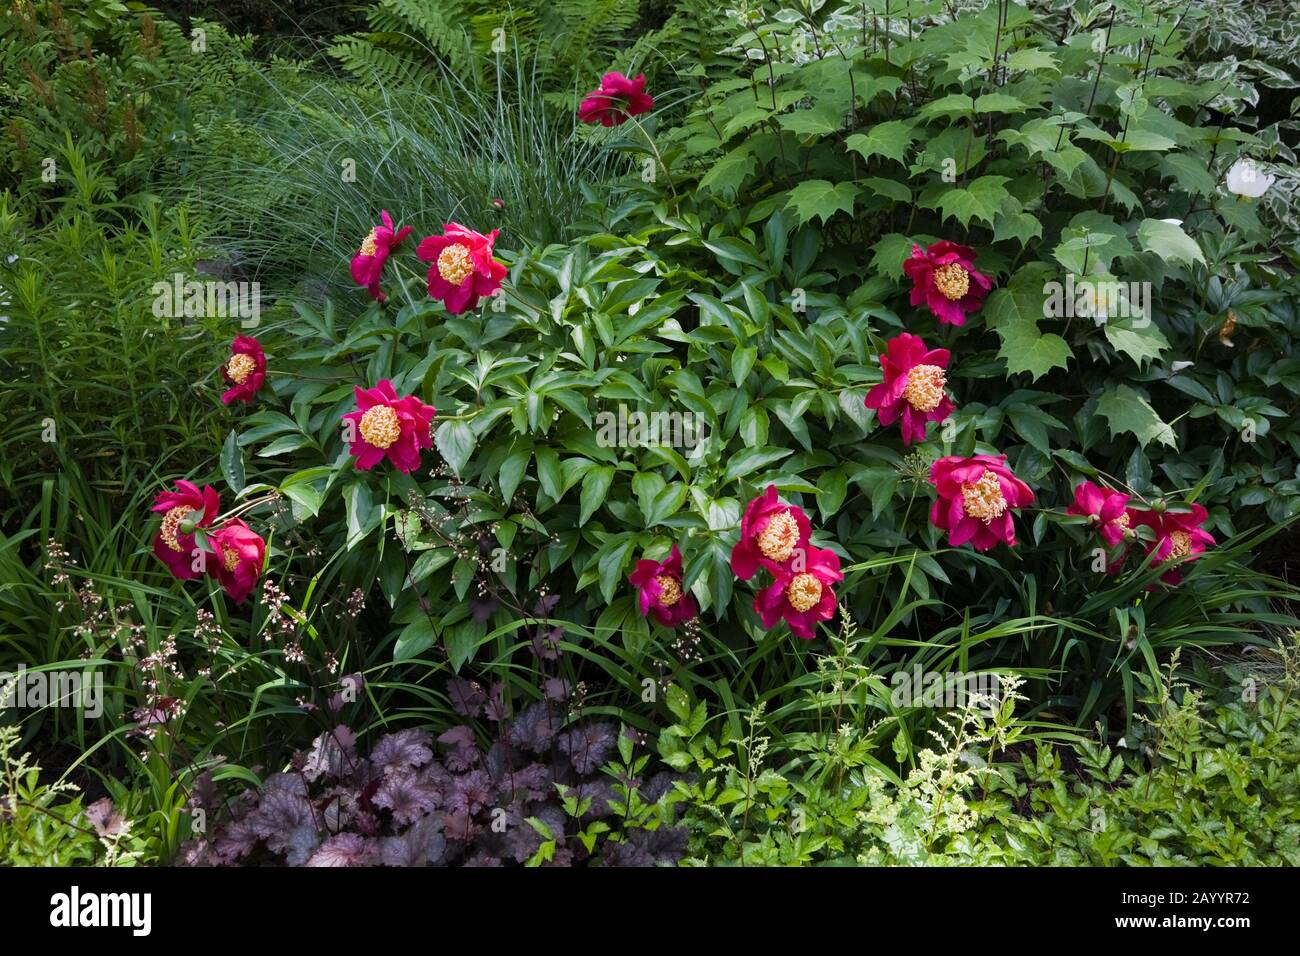 Heuchera Coral Flower Plants Japanese Paeonia Peonies In Border In Landscaped Backyard Garden In Late Spring Stock Photo Alamy